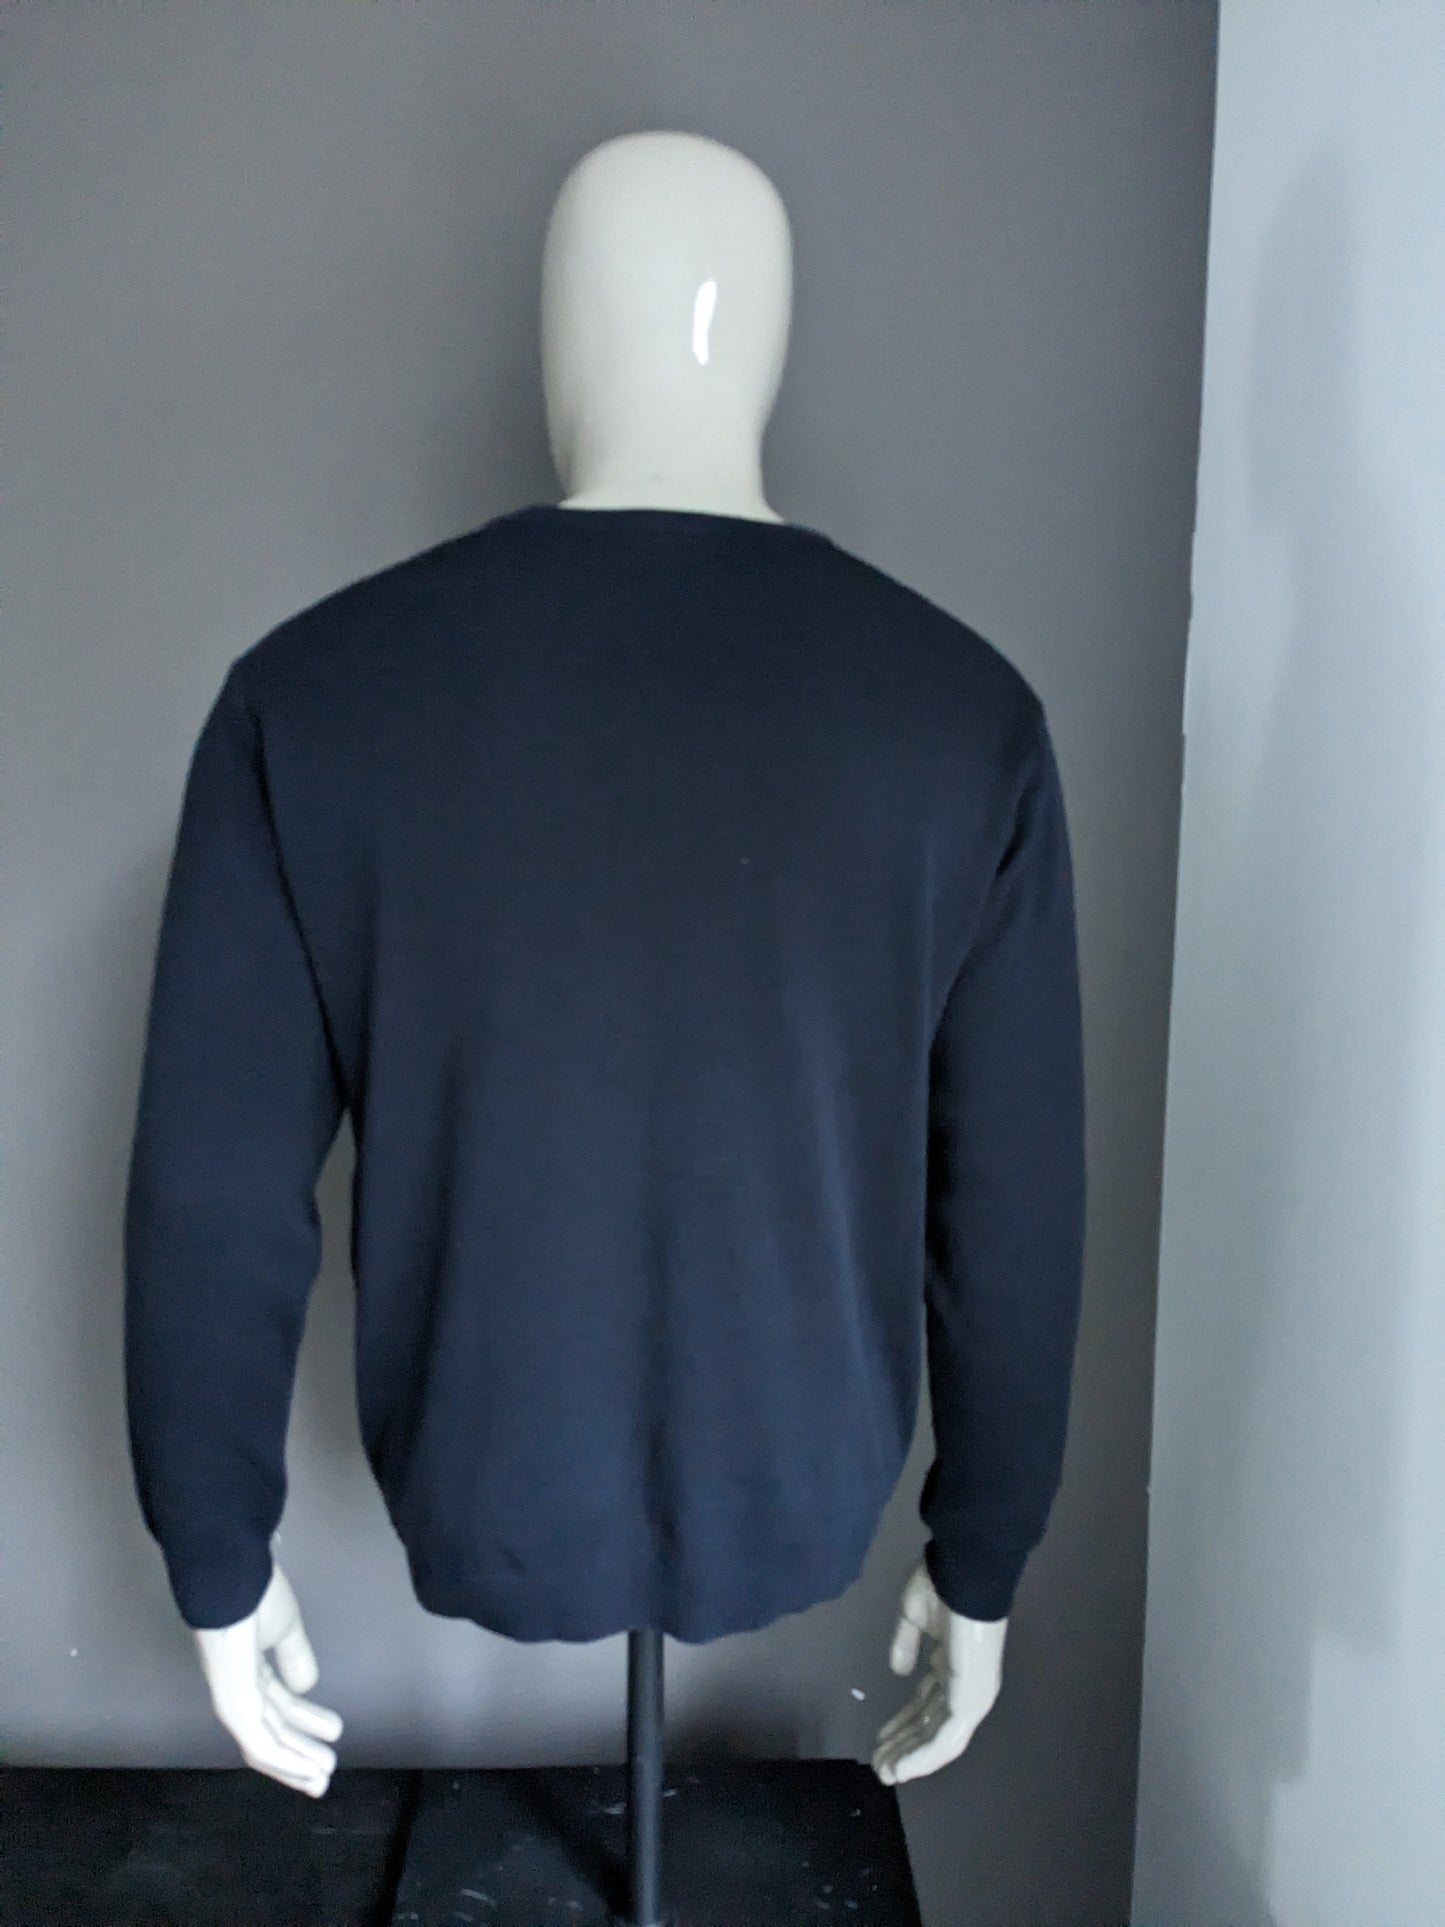 Vintage look Dunnes cable sweater. Dark blue colored. Size M.